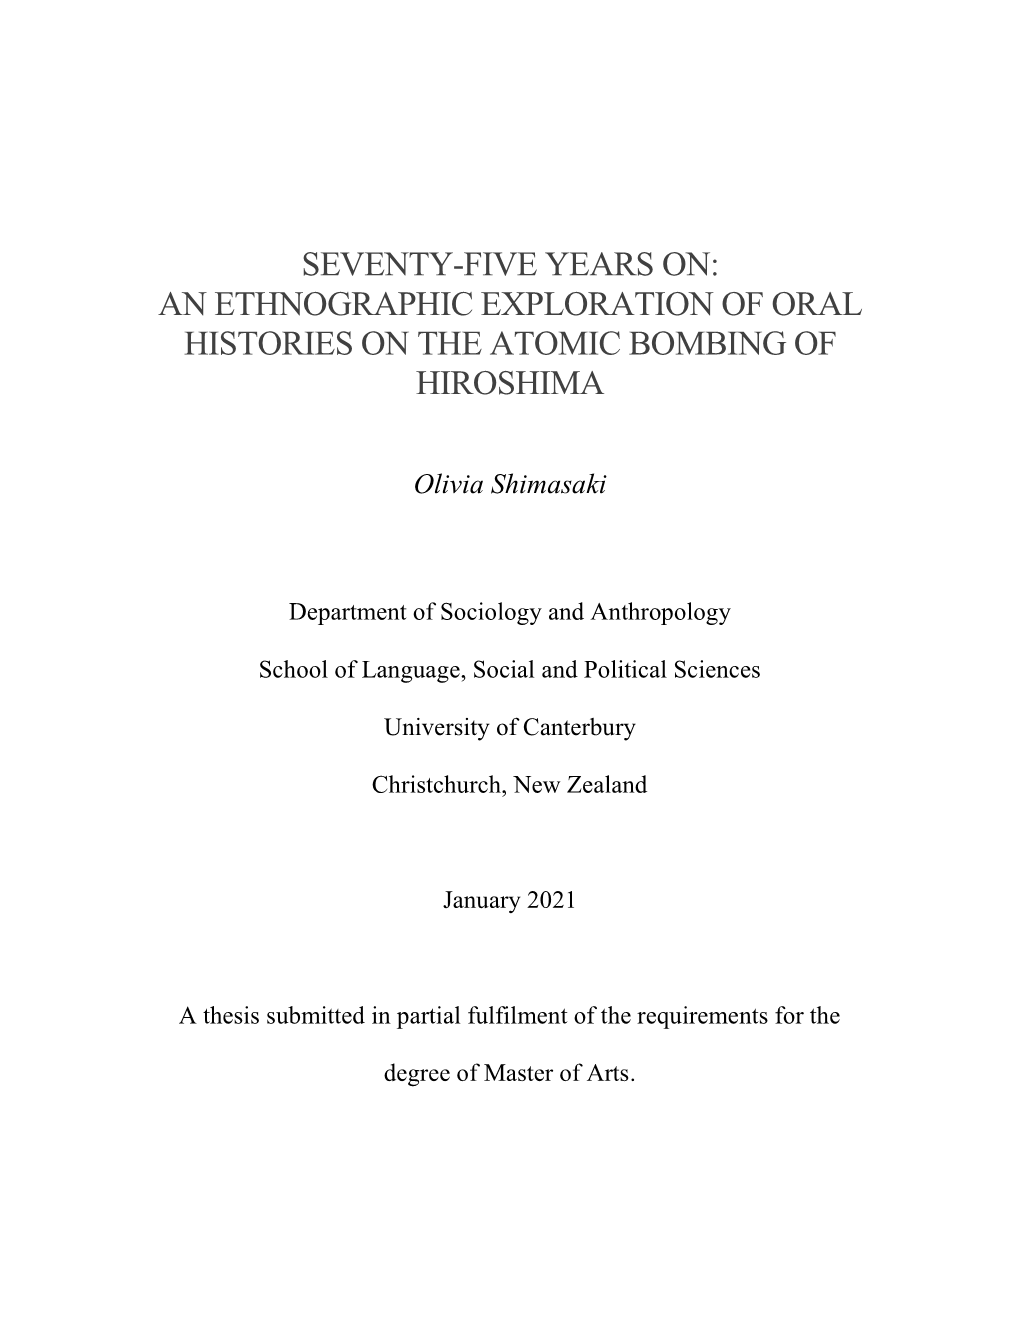 An Ethnographic Exploration of Oral Histories on the Atomic Bombing of Hiroshima